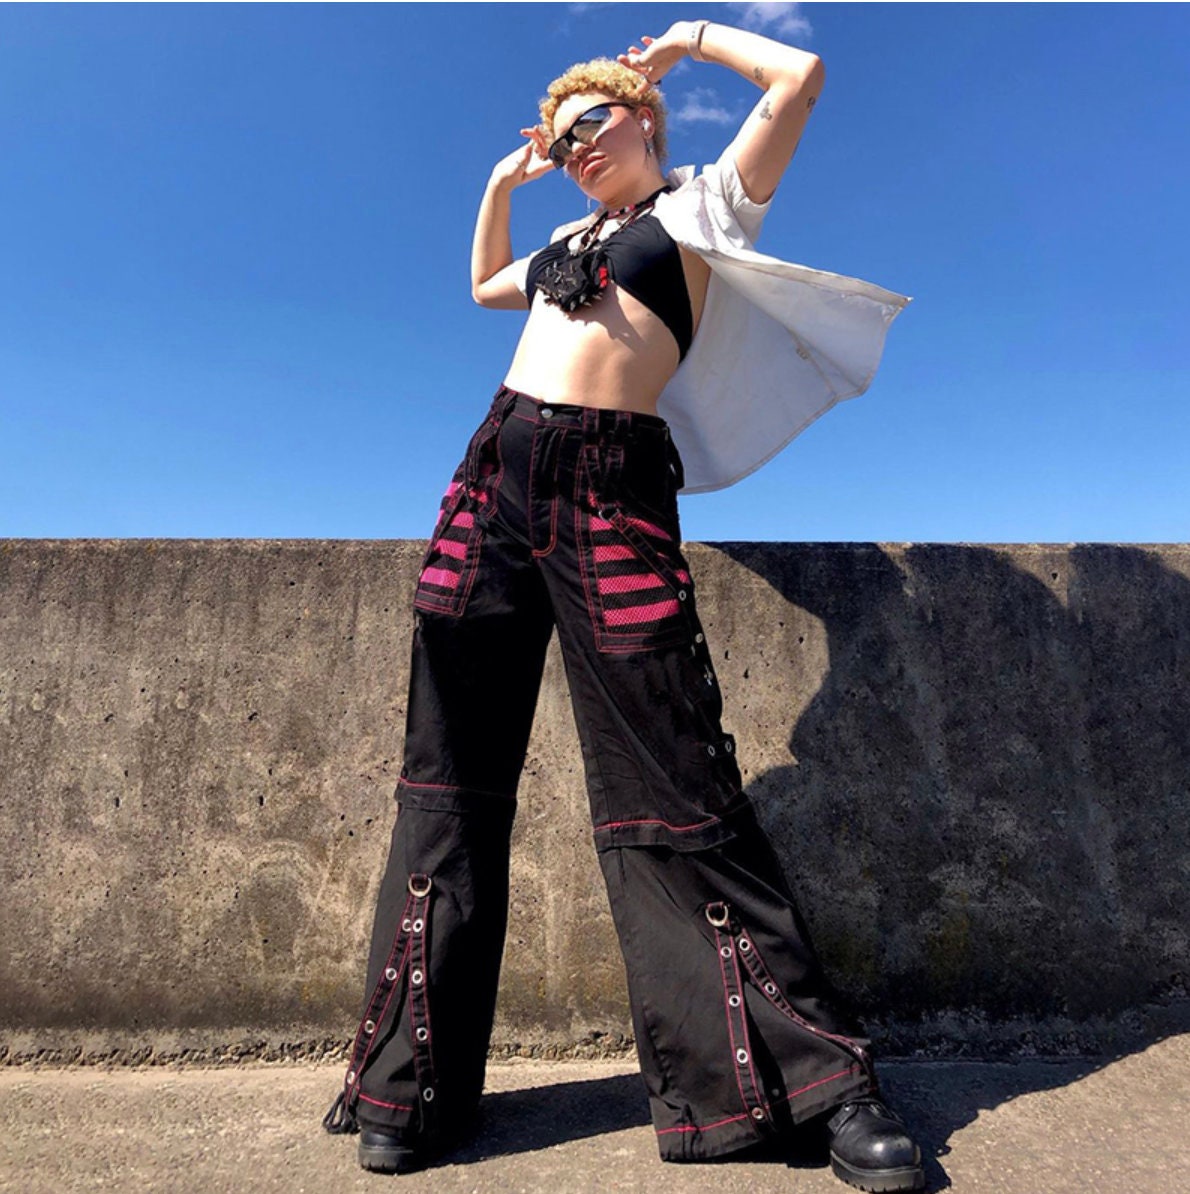 Gothic Chain Bandage goth clothing punk alt edgy mall goth Wide leg Pants Women Oversize Low Rise Dark Trousers 90s Baggy Pant Punk Style # 202